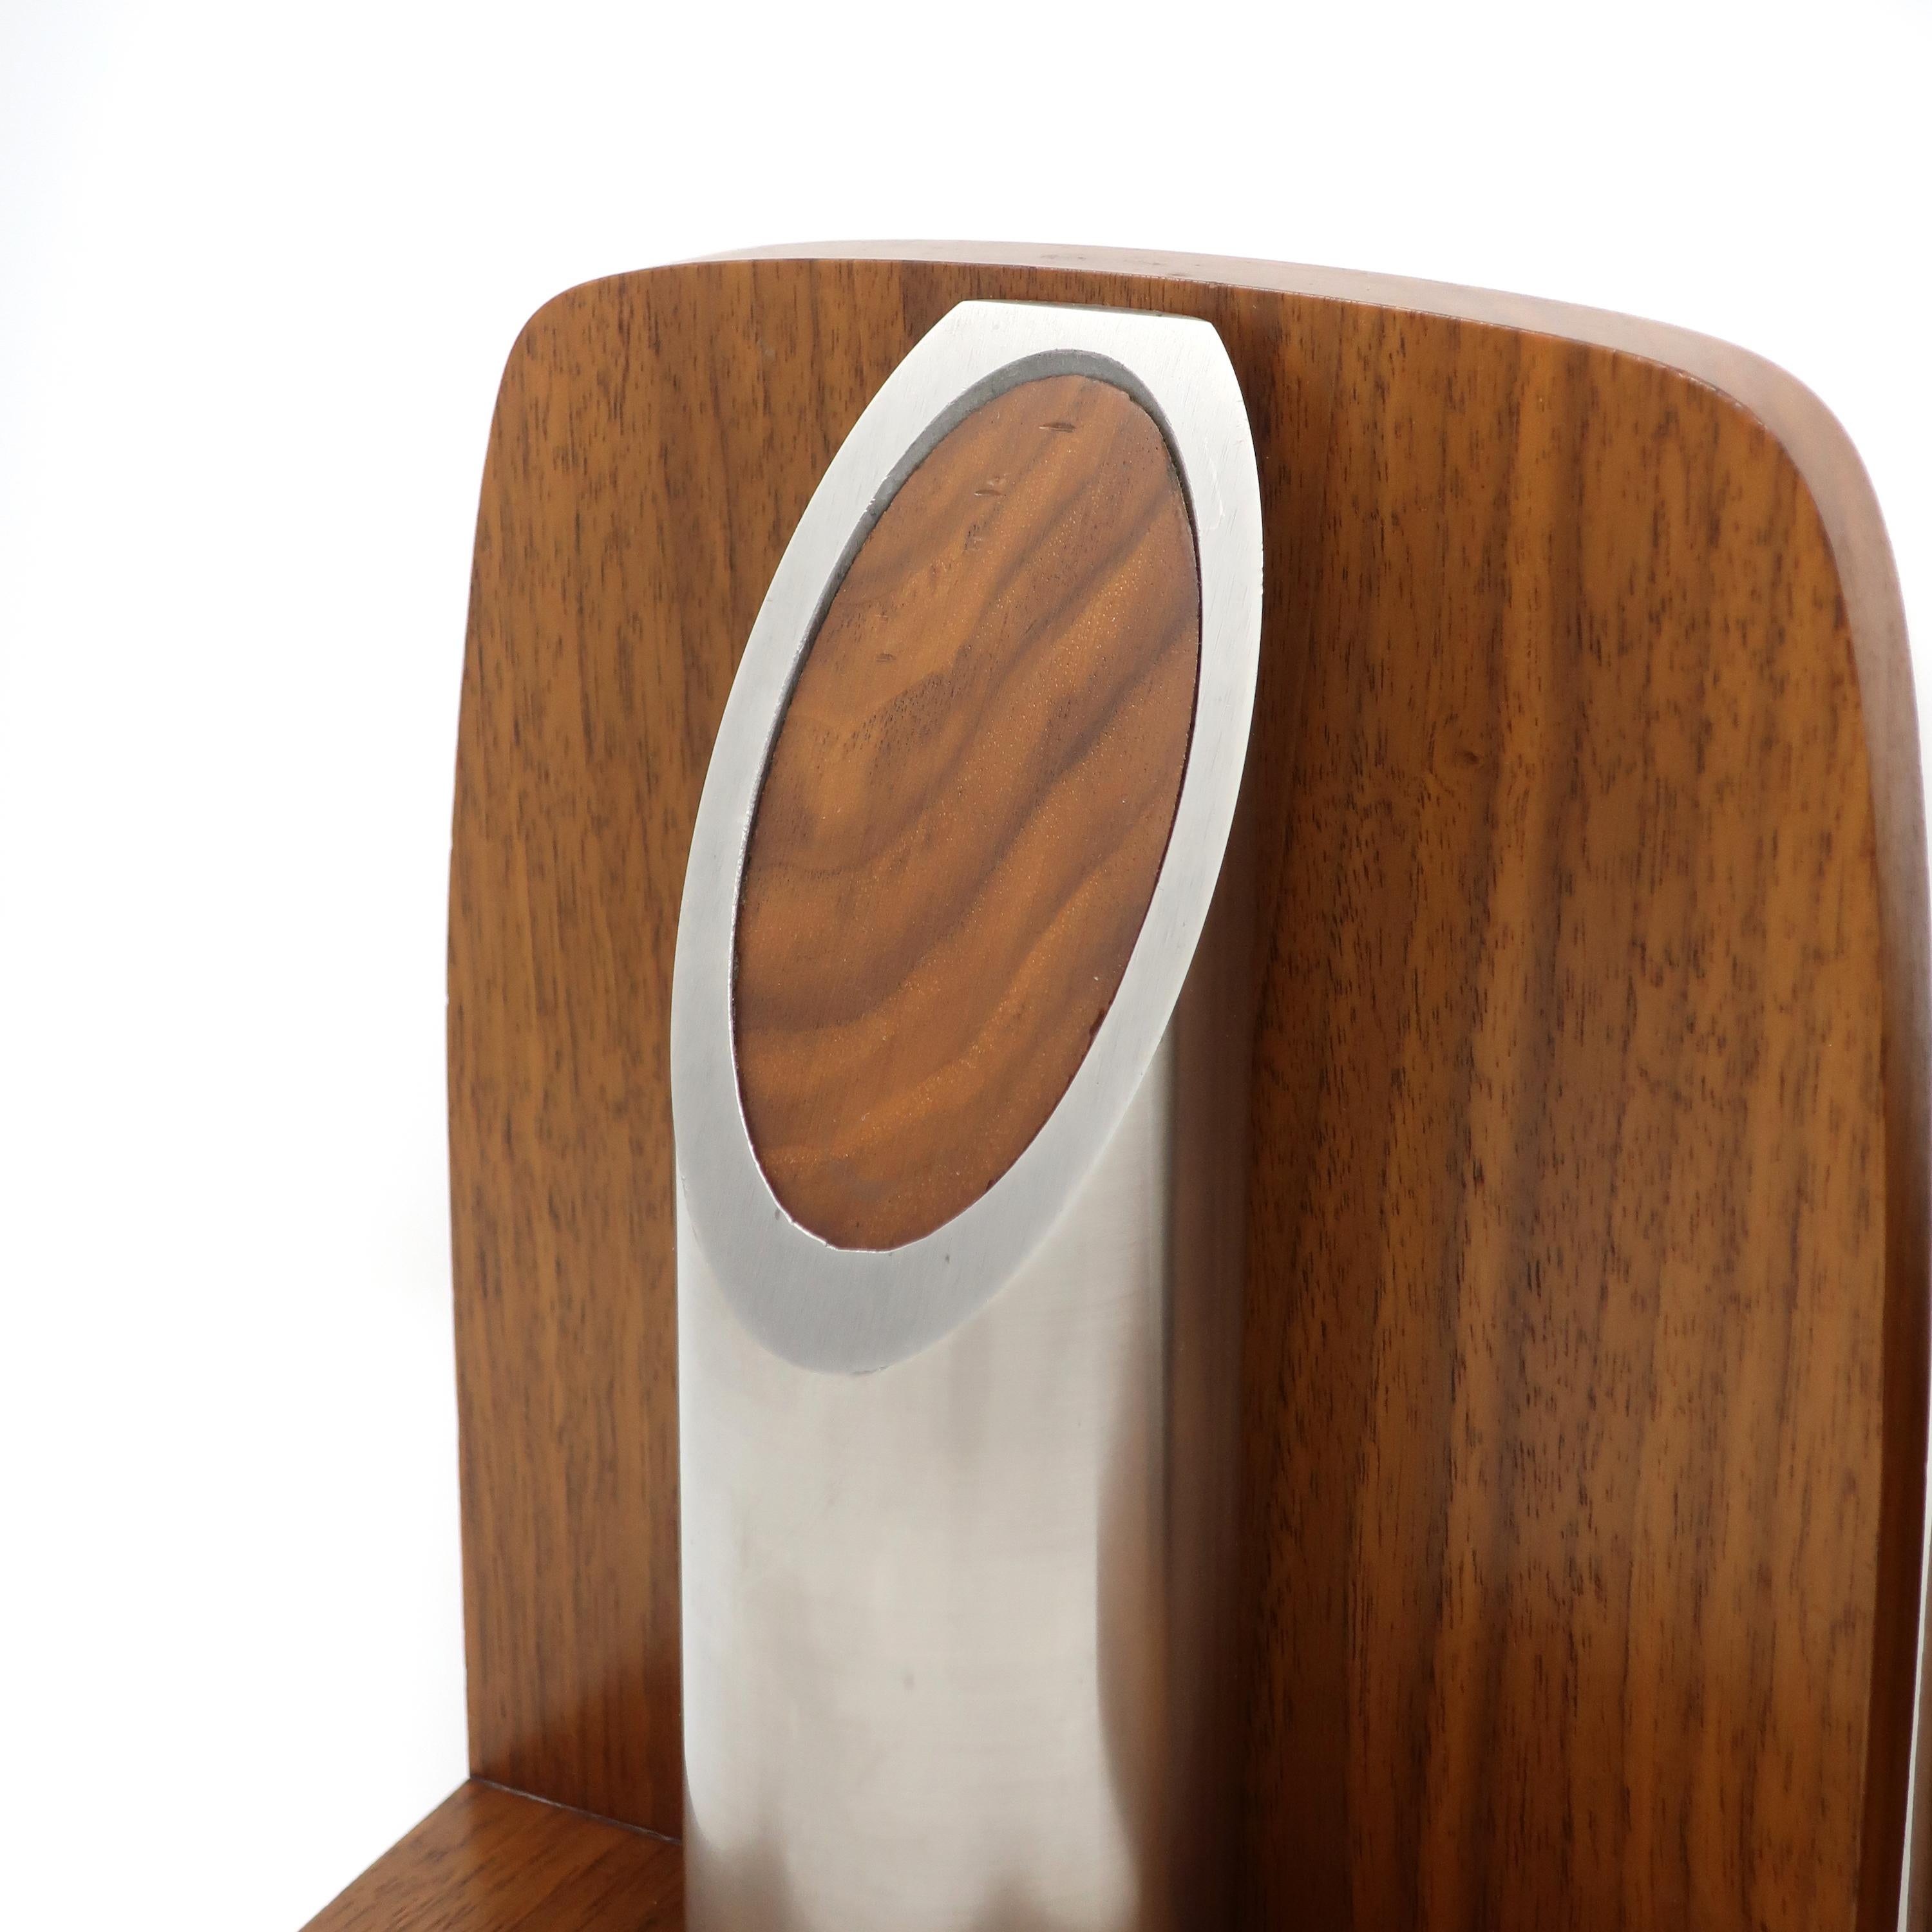 Pair of Art Deco Walnut and Polished Aluminum Bookends 1